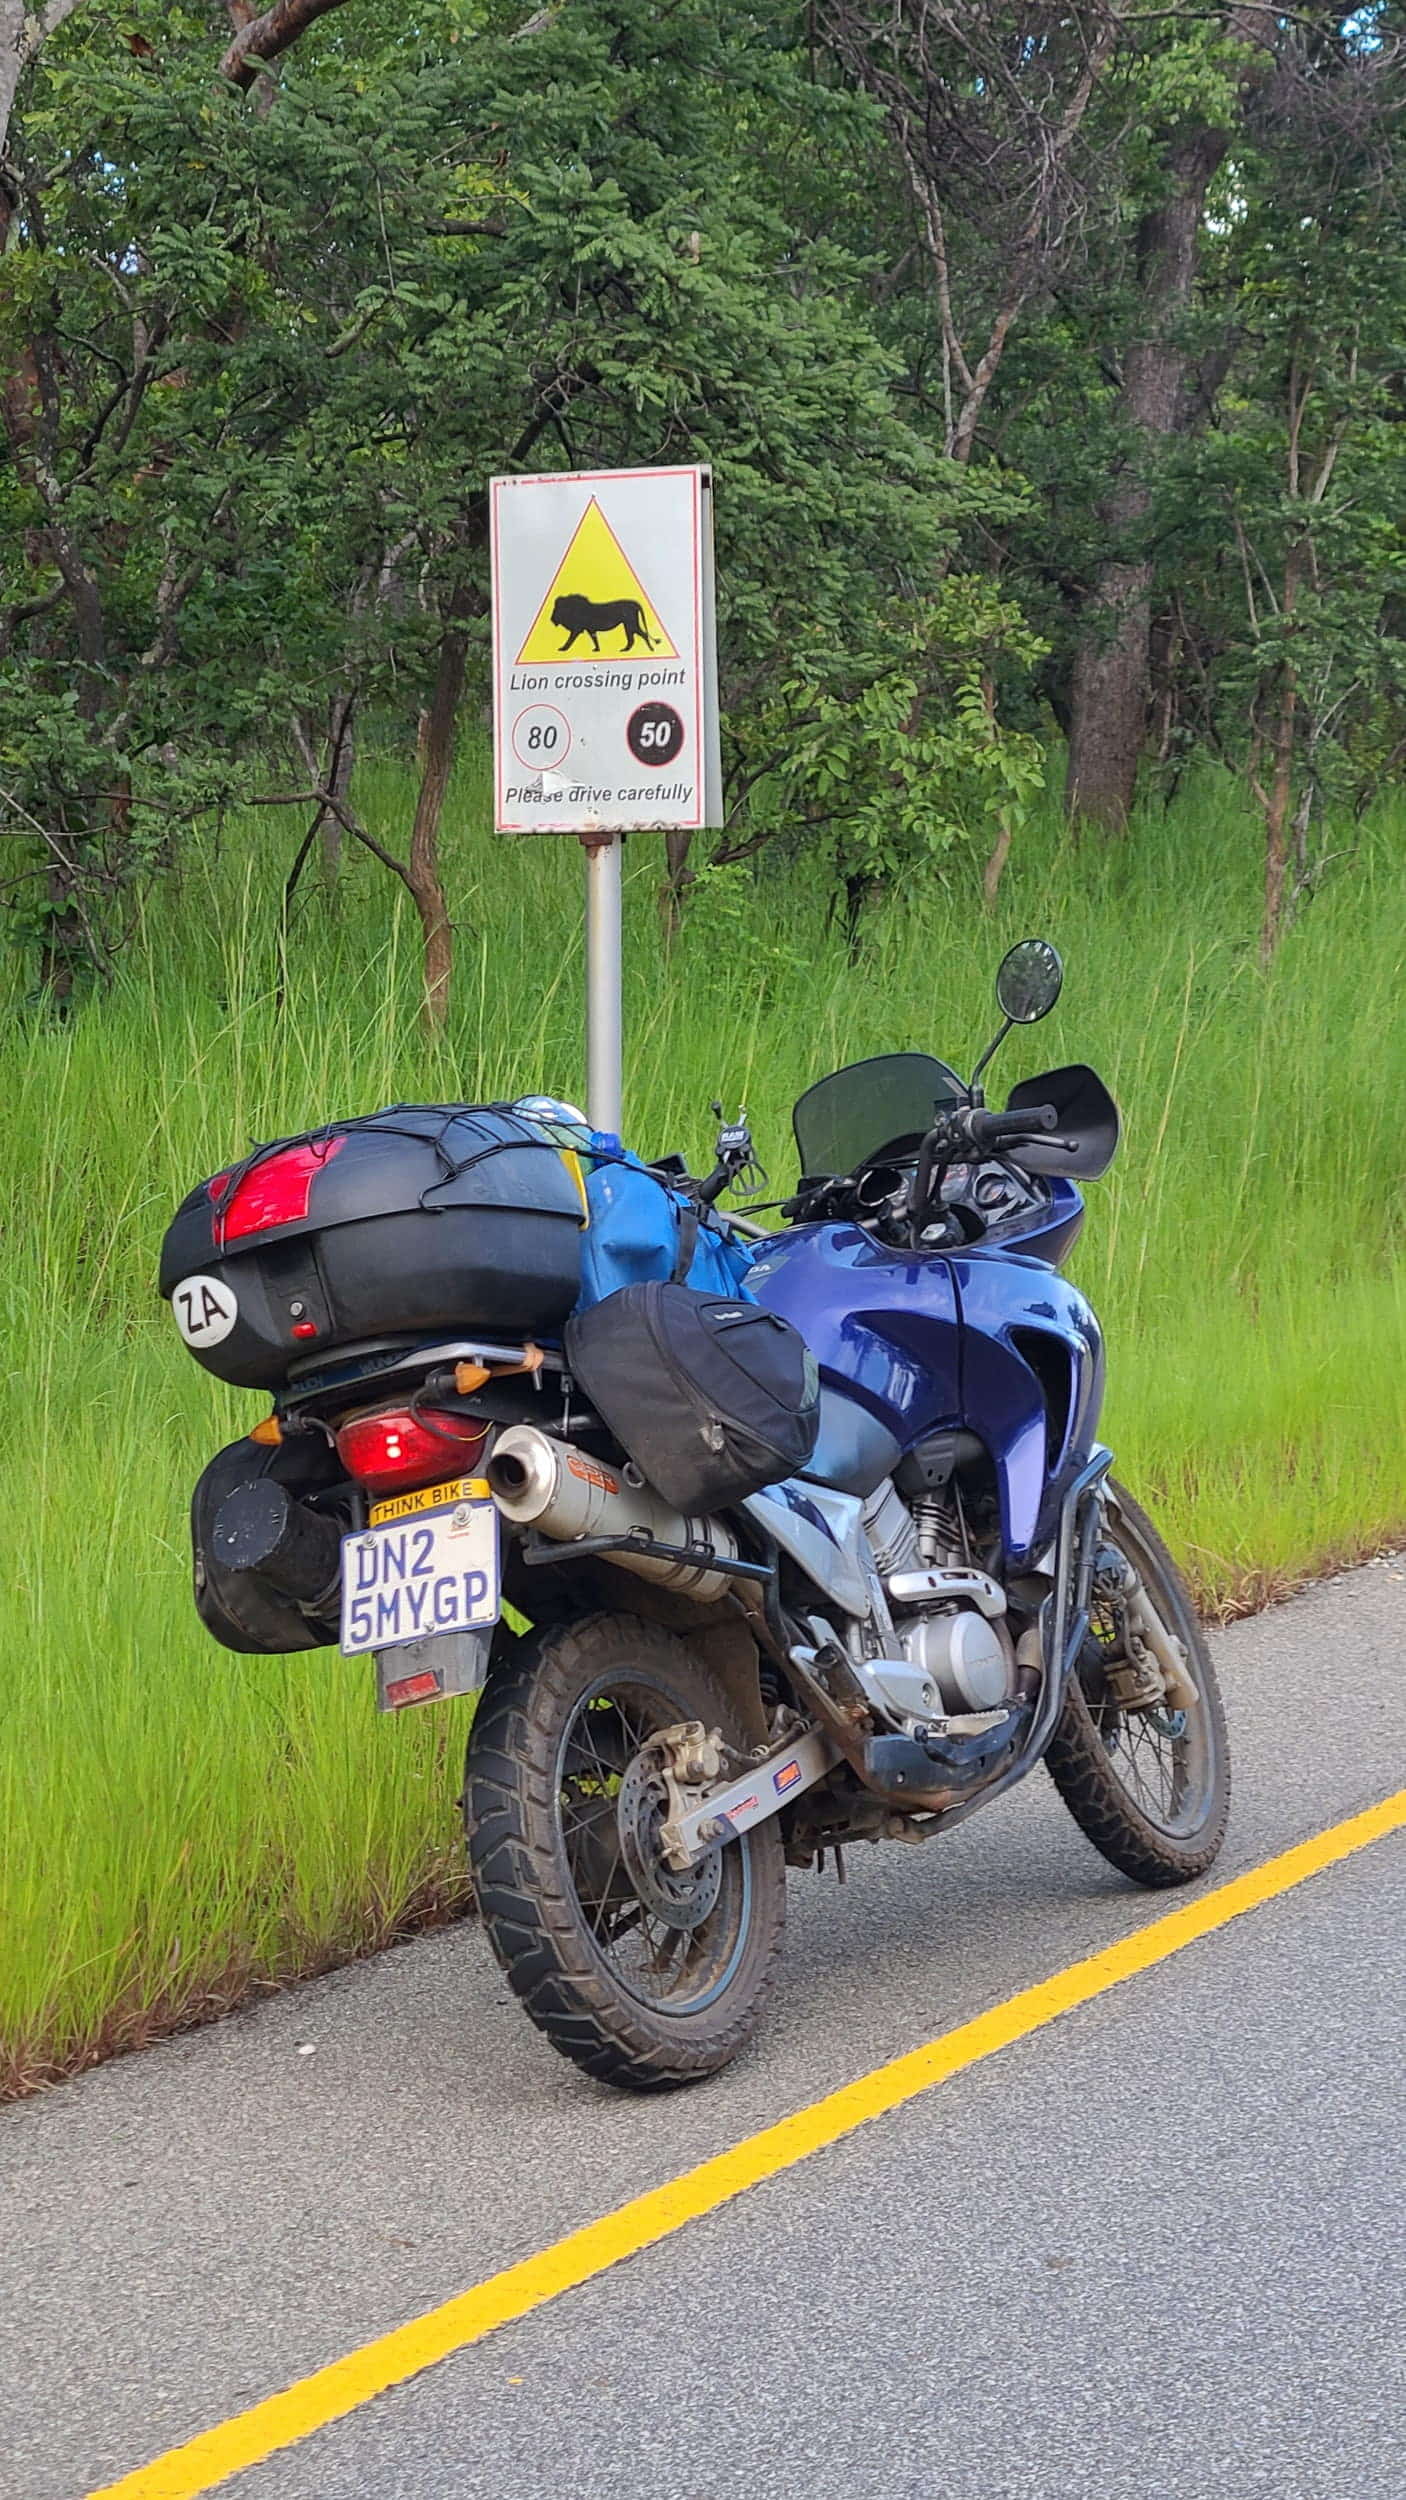 a motorcycle parked next to lion crossing sign 